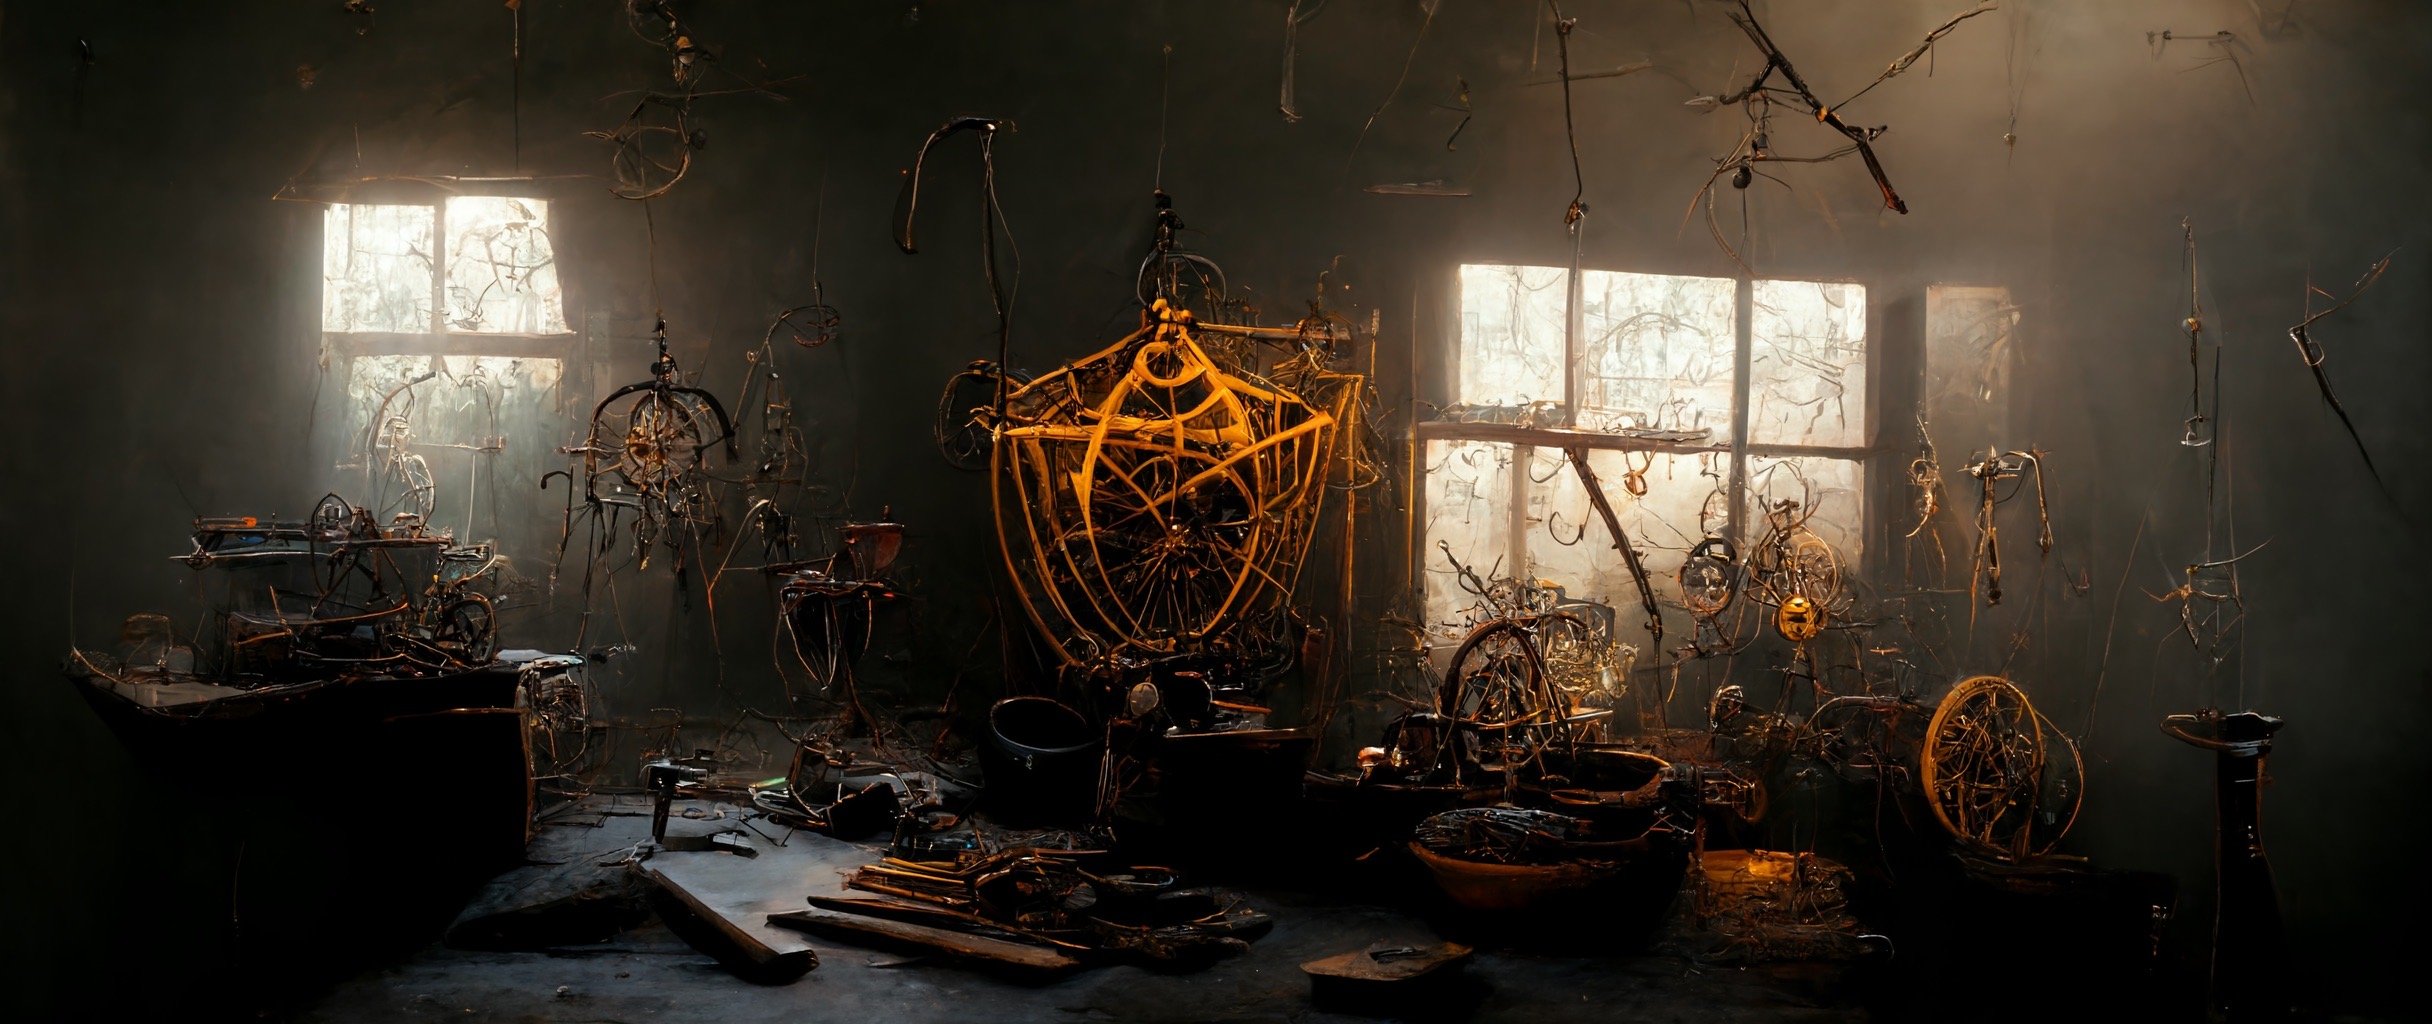 ef4f3382-3c1f-4d1e-81ae-915eb9d51667_S3RAPH_dimly_lit_old_workshop_with_Spider_webs_and_dusty_tools_and_detailed_trinkets_all_over._Mysterious_a.JPG